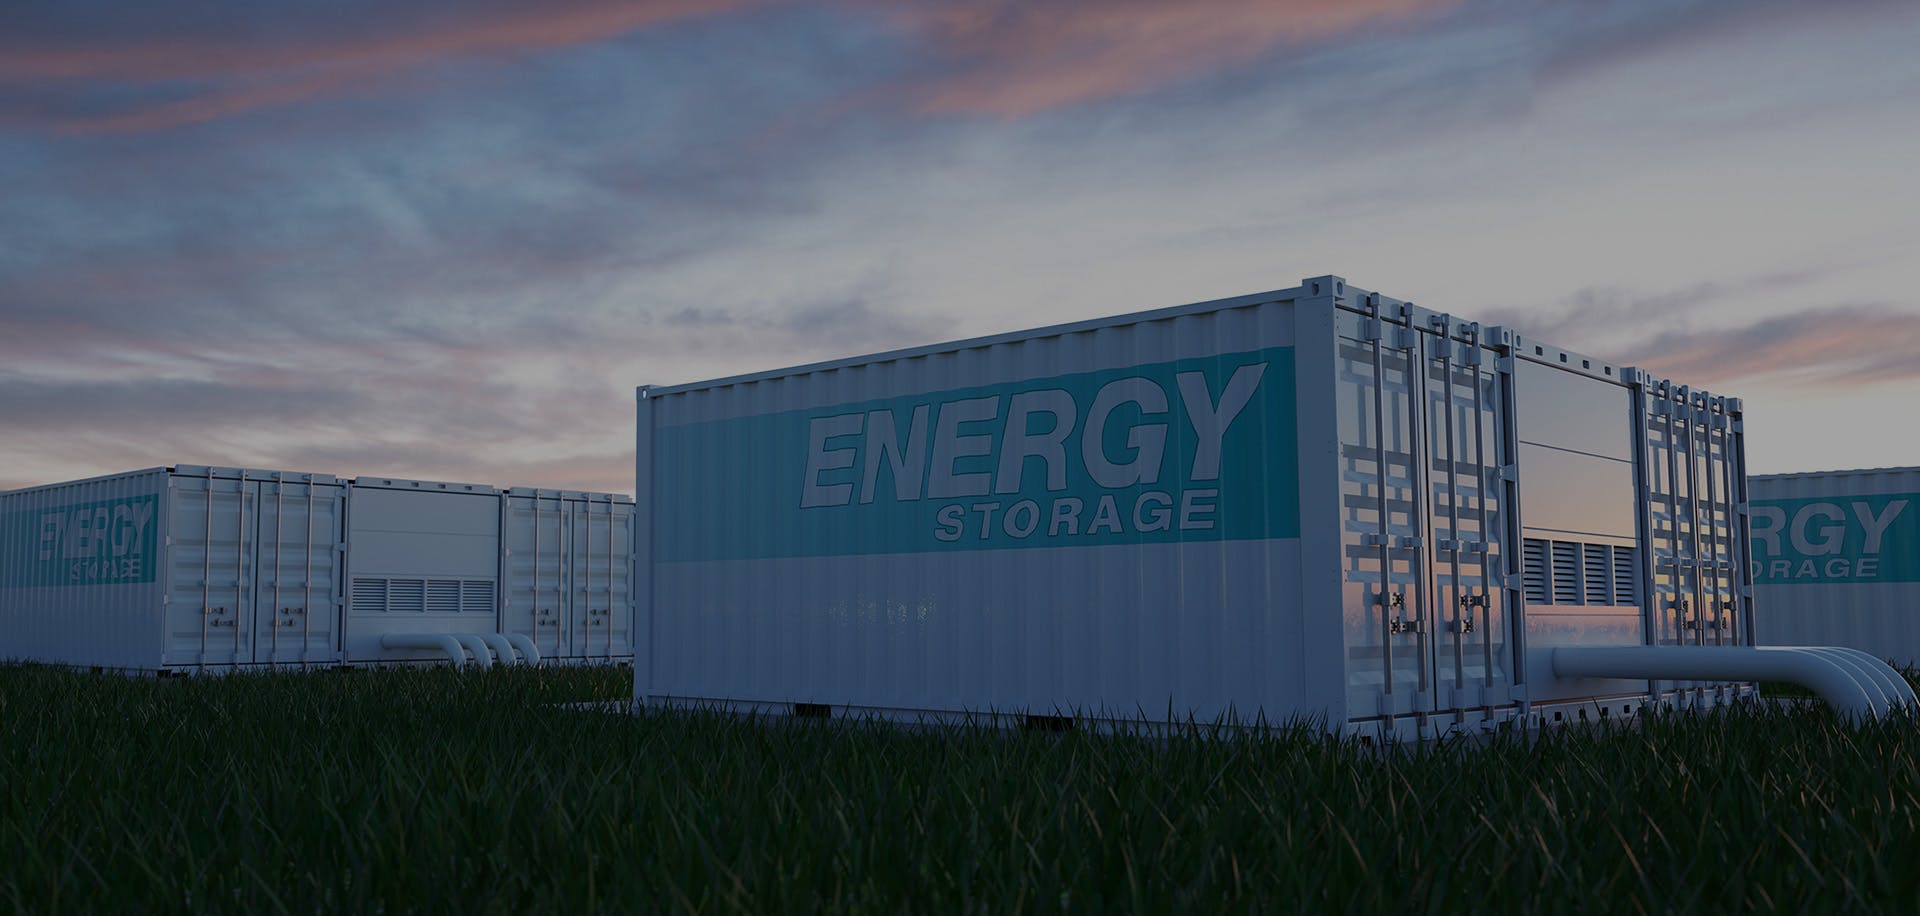 Image of battery storage containers sitting in a grassy field with a moody sunset behind .